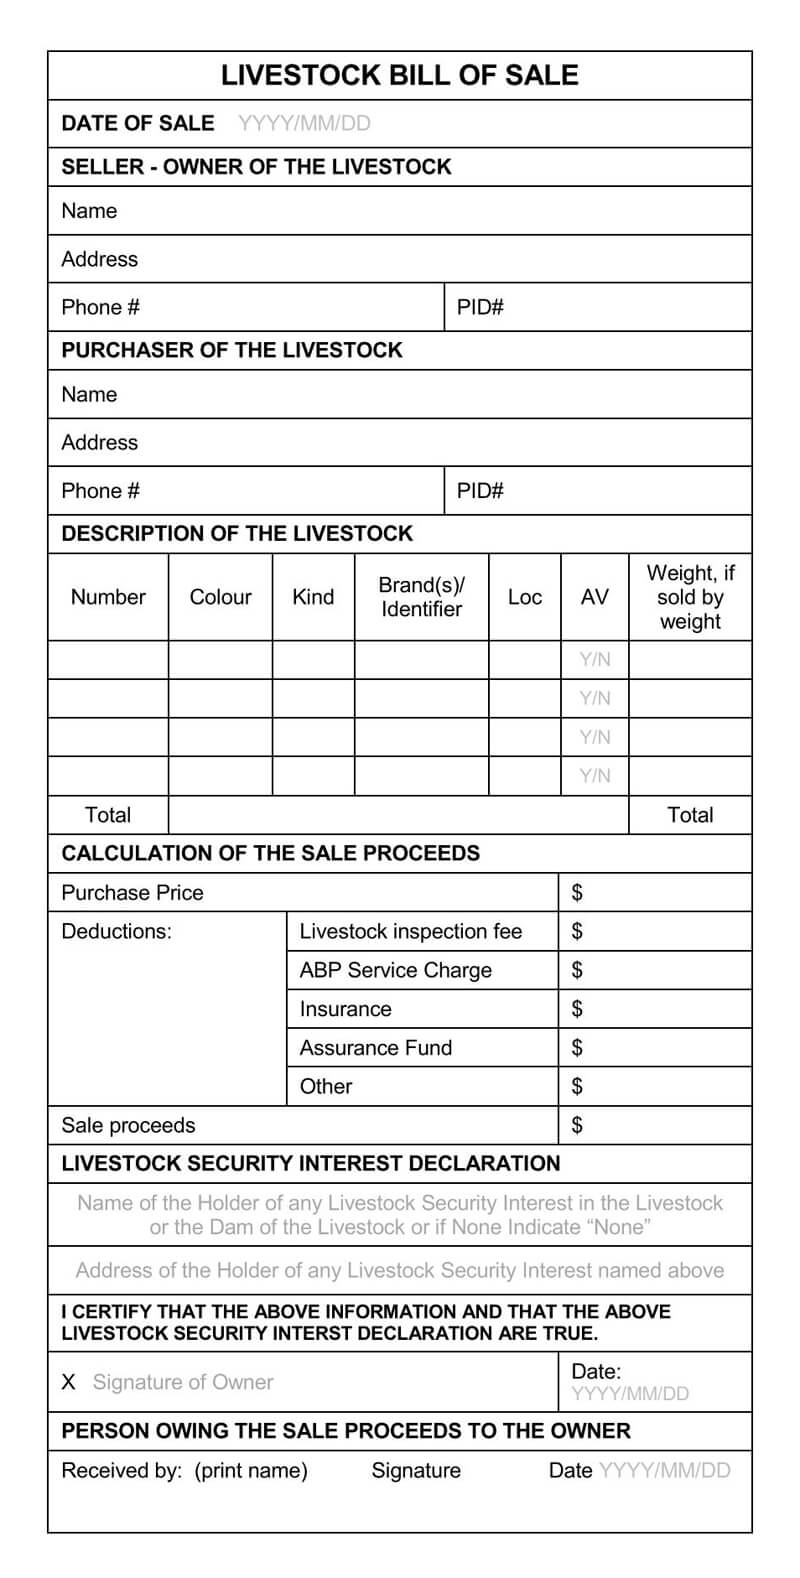 Free Livestock Bill of Sale Form 07 in Word